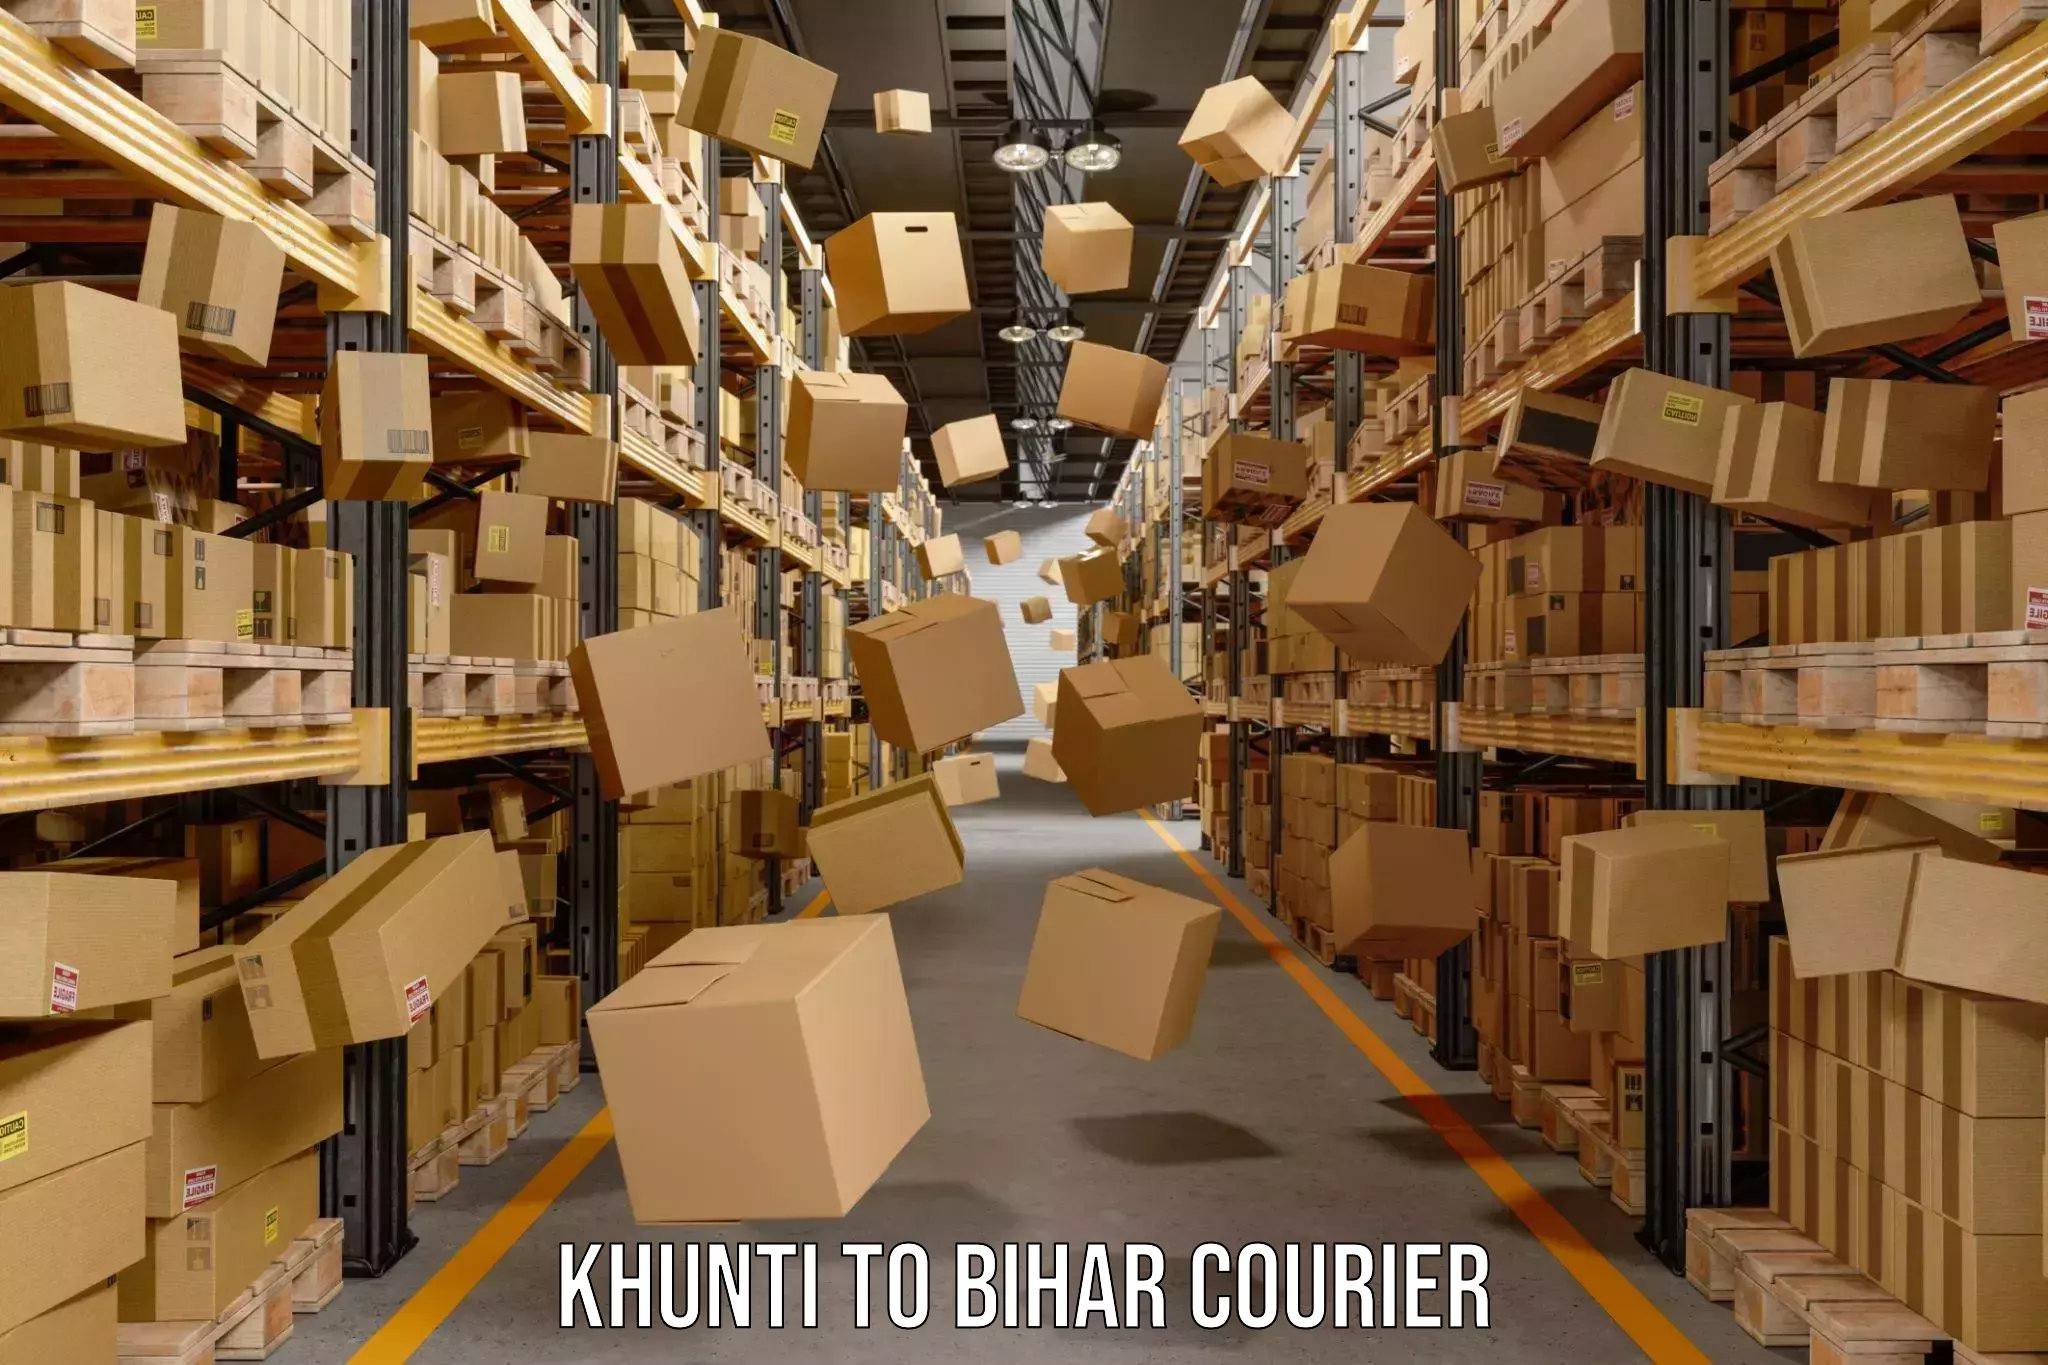 Delivery service partnership Khunti to Bihar